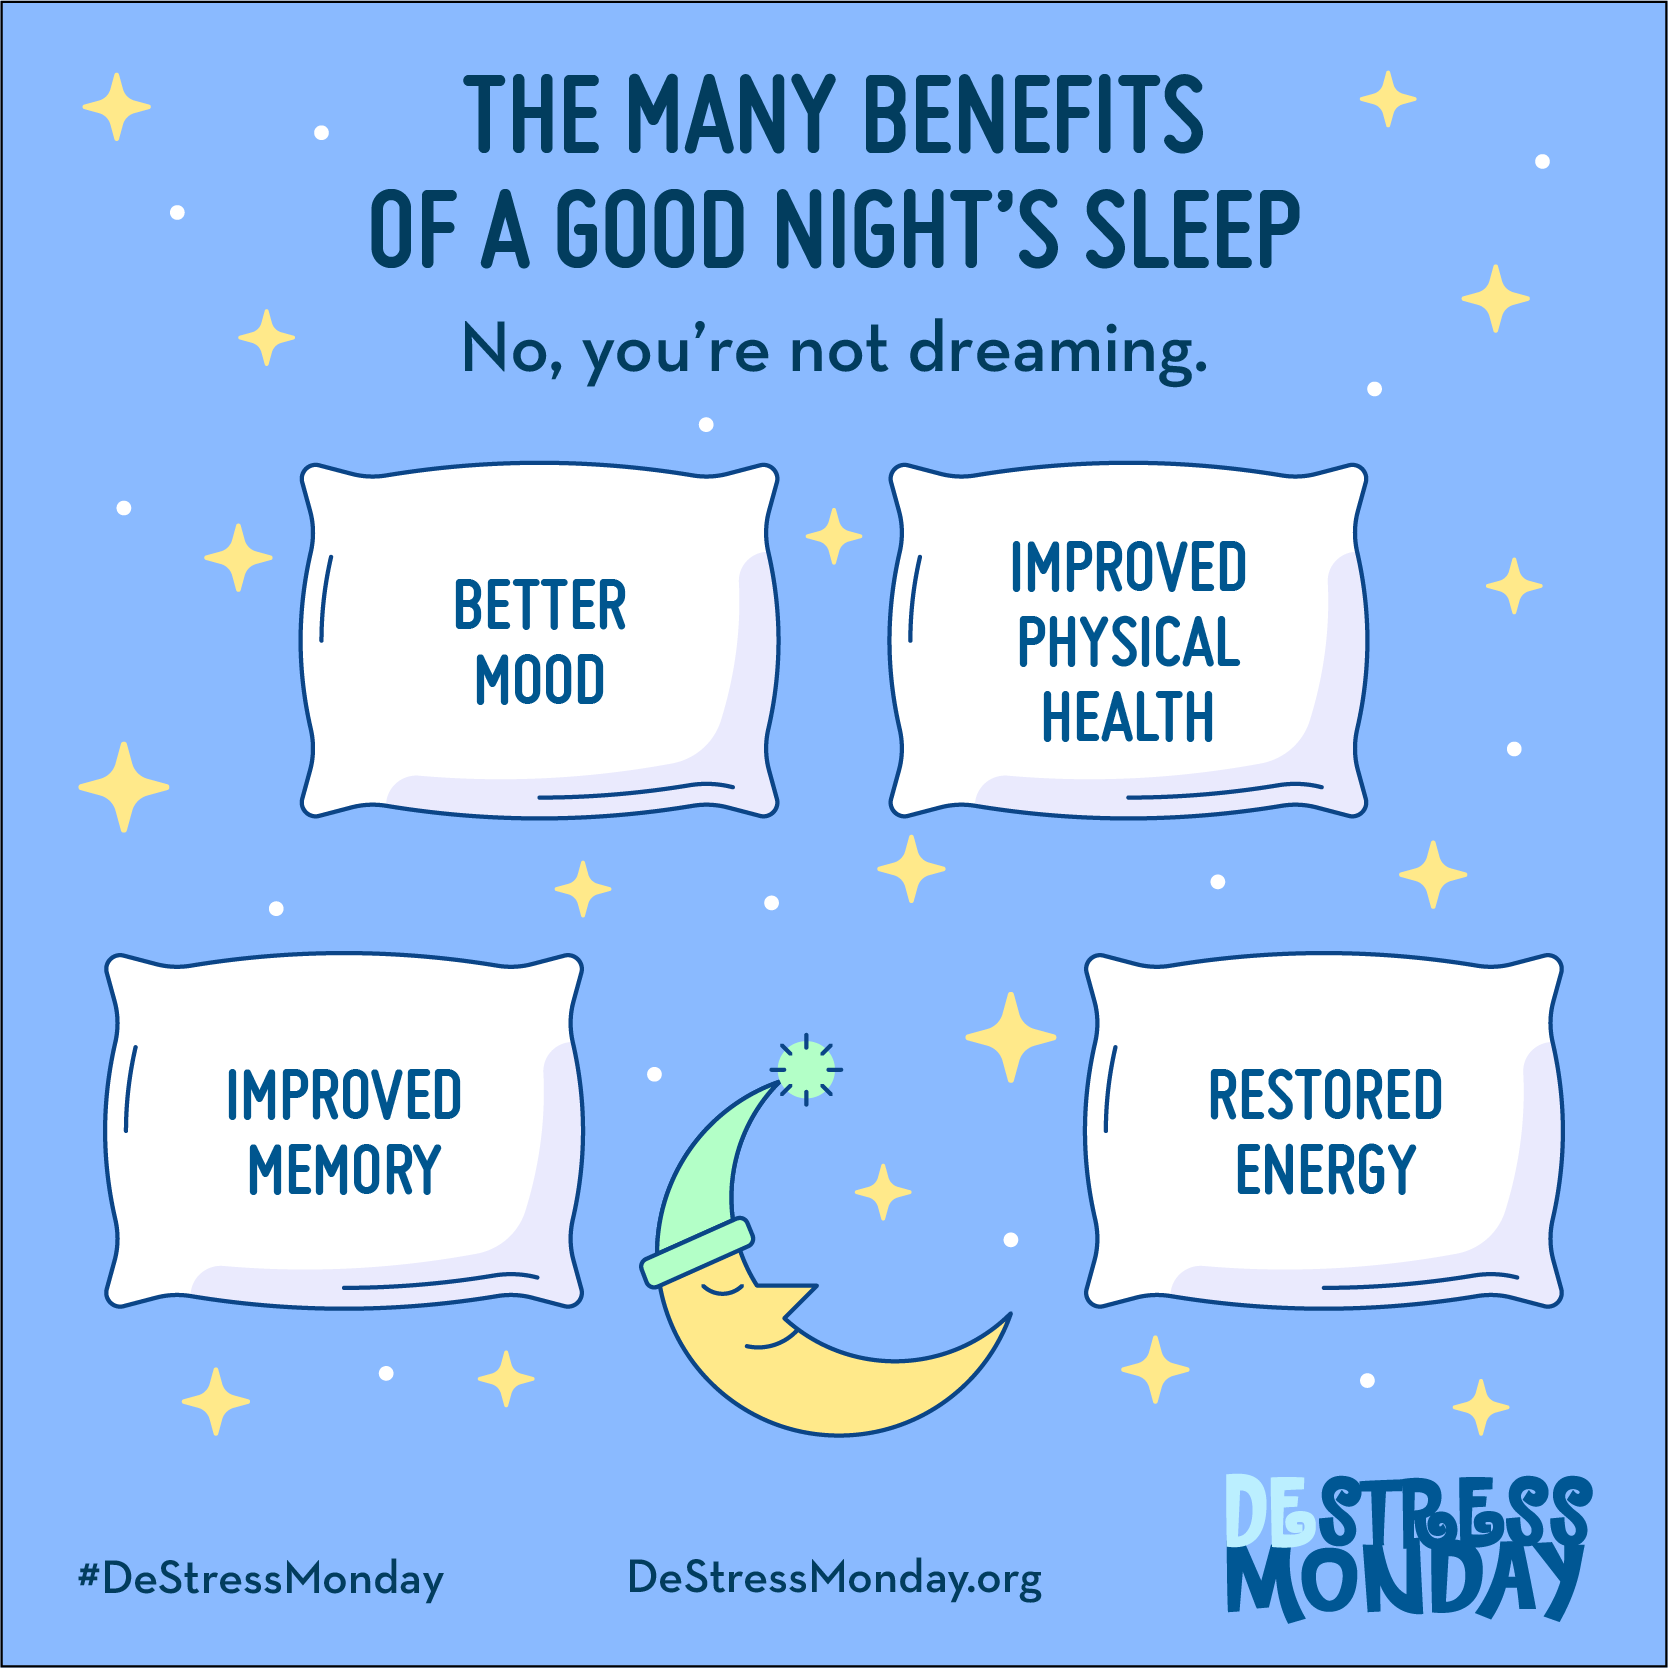 The many benefits of a good night's sleep. No, you're not dreaming. Better mood. Improved physical health. Improved memory. Restored energy.